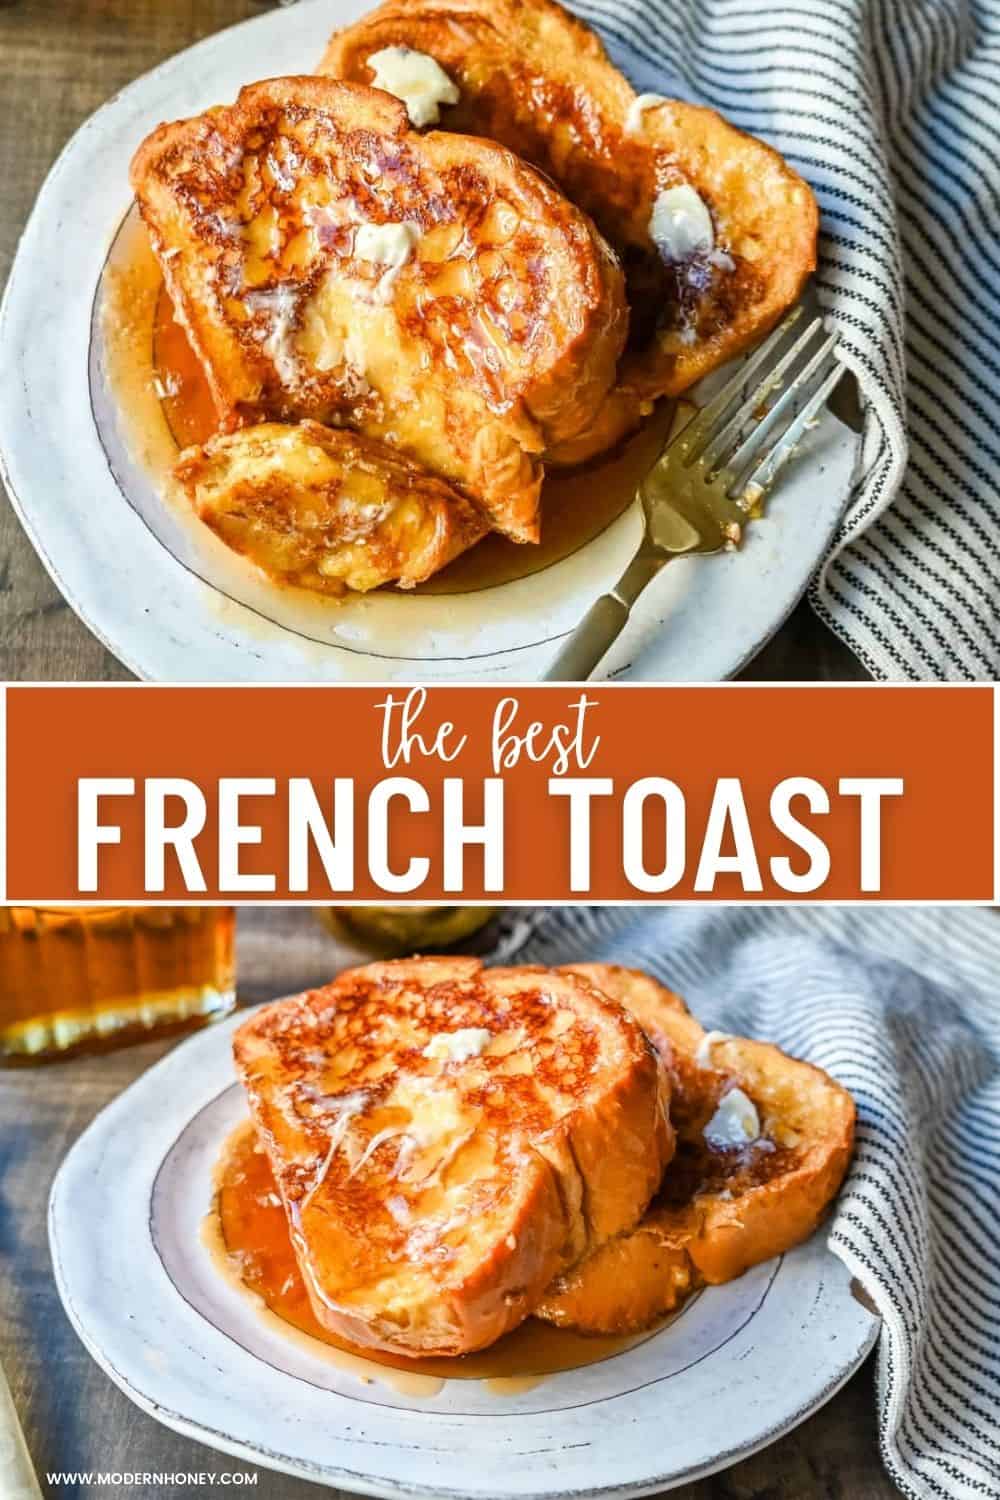 Best French Toast Recipe. There is an art to making the best French toast and I will share tips and tricks for achieving the perfect balance of buttery, crisp edges and custardy centers. These tips will elevate your French toast at home.